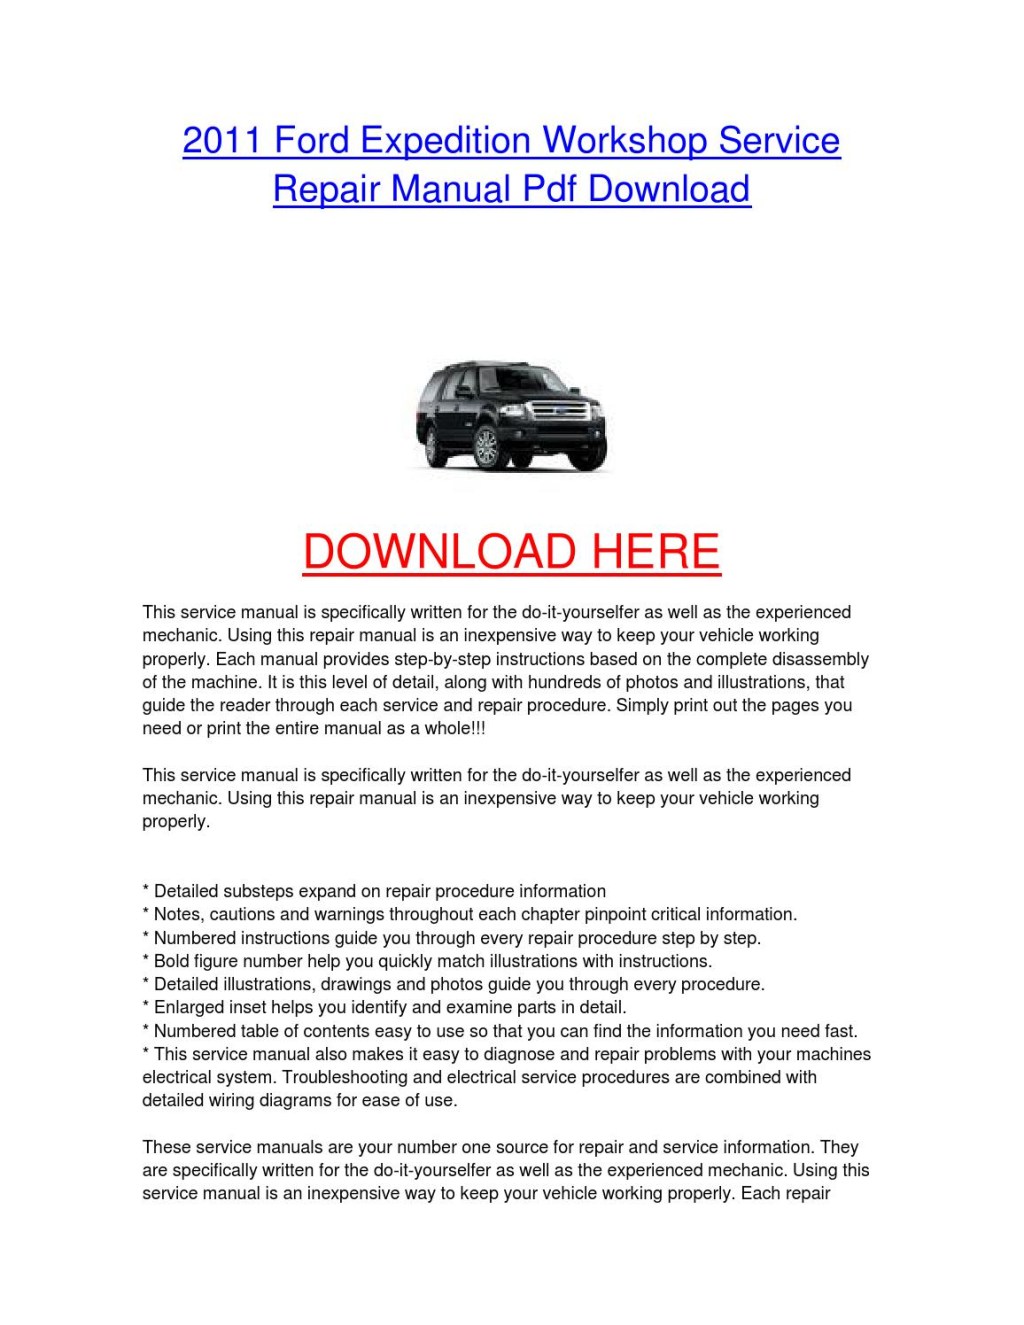 Picture of: ford expedition car service repair manual by fordcarservice